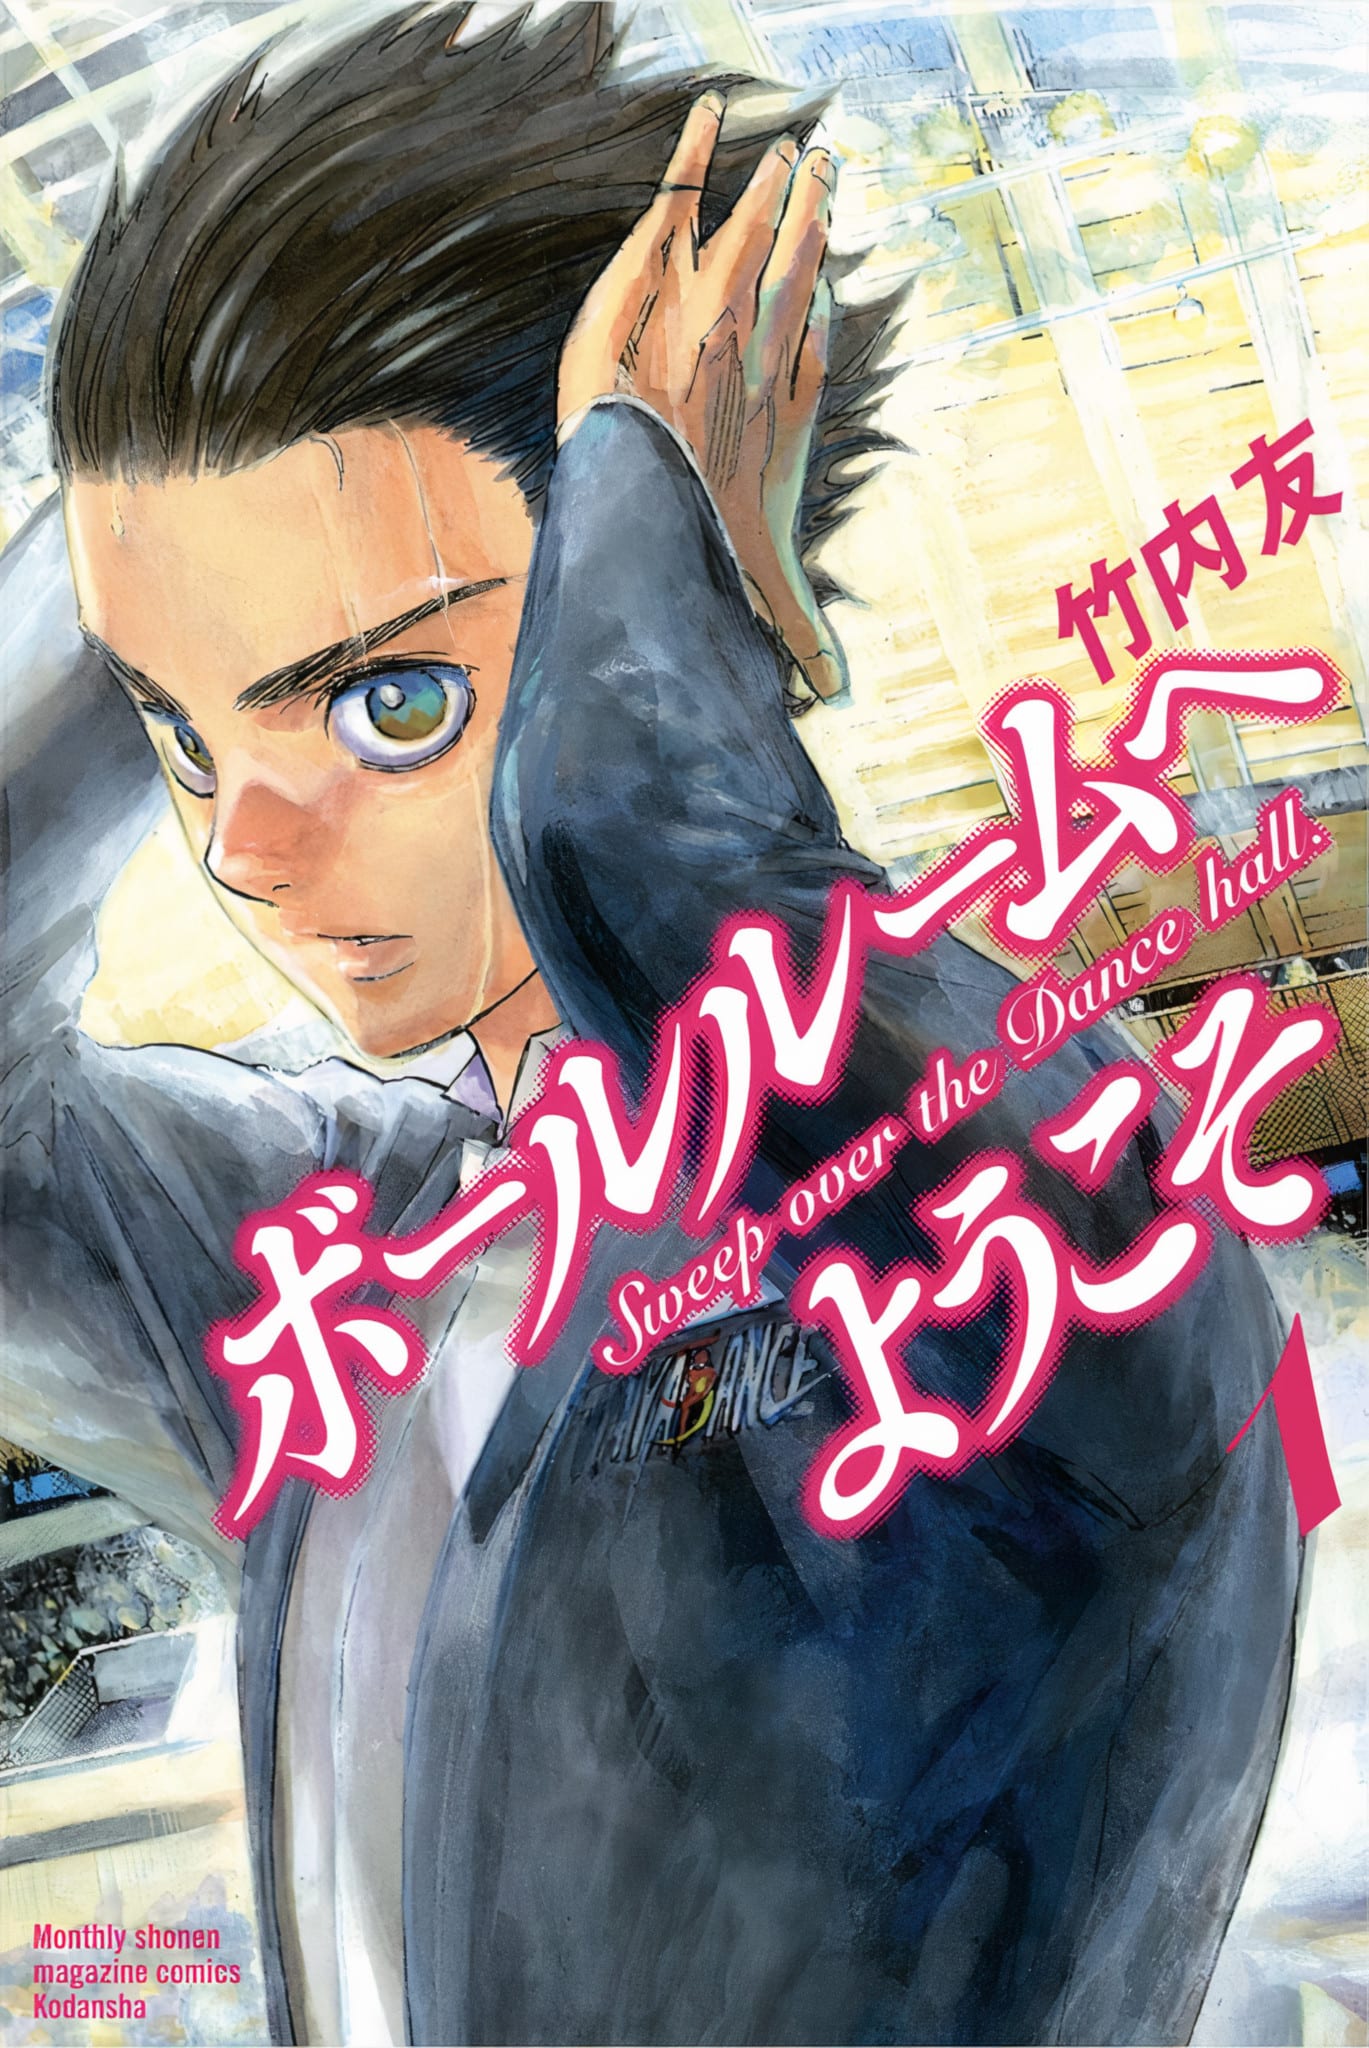 Annonce du manga Welcome to the Ballroom aux éditions Noeve Grafx